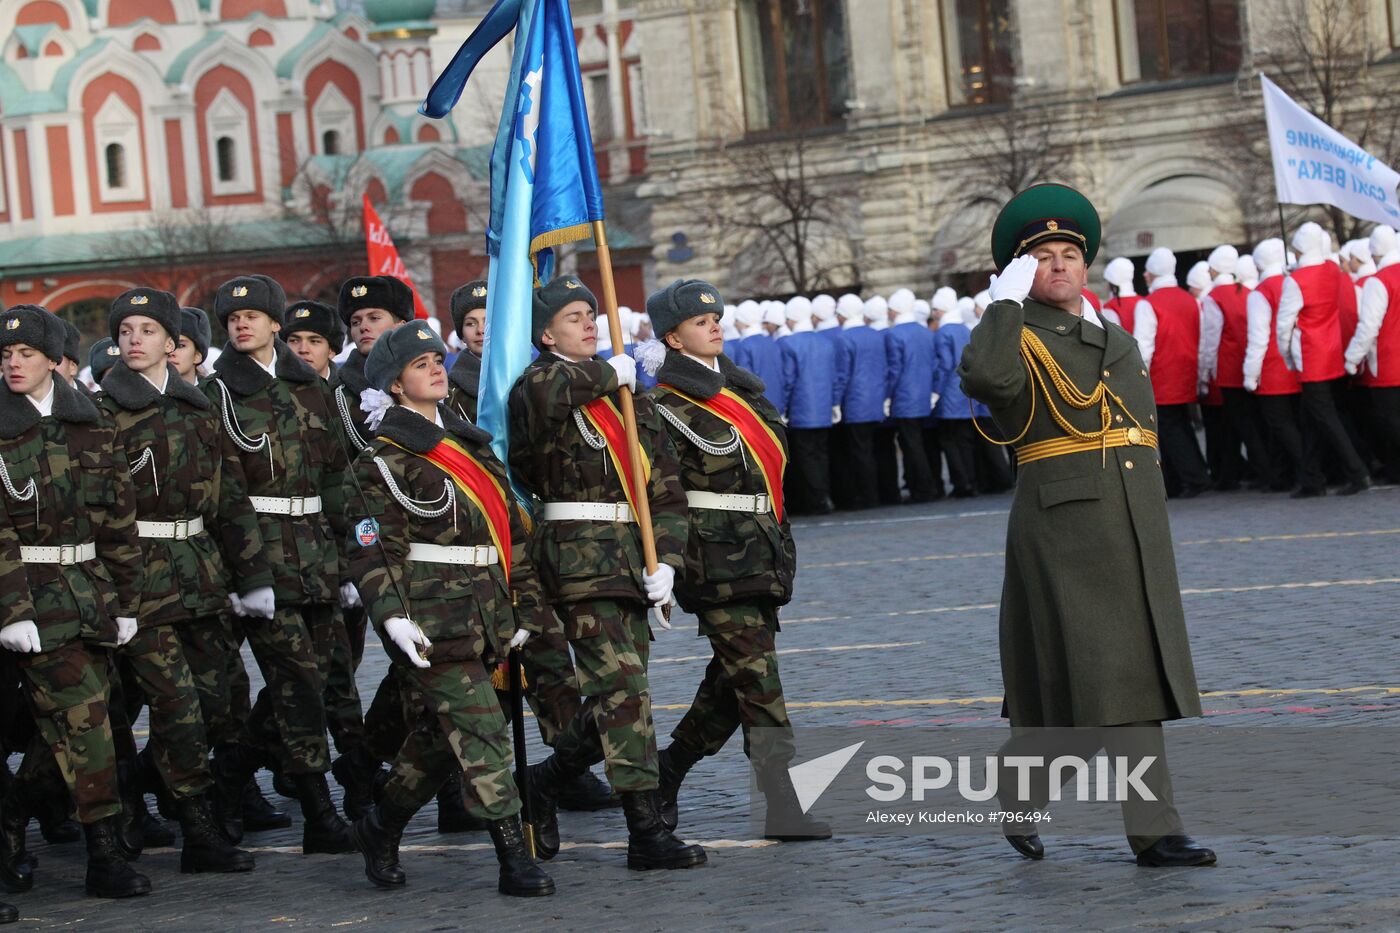 March on 69th anniversary of parade held on November 7, 1941